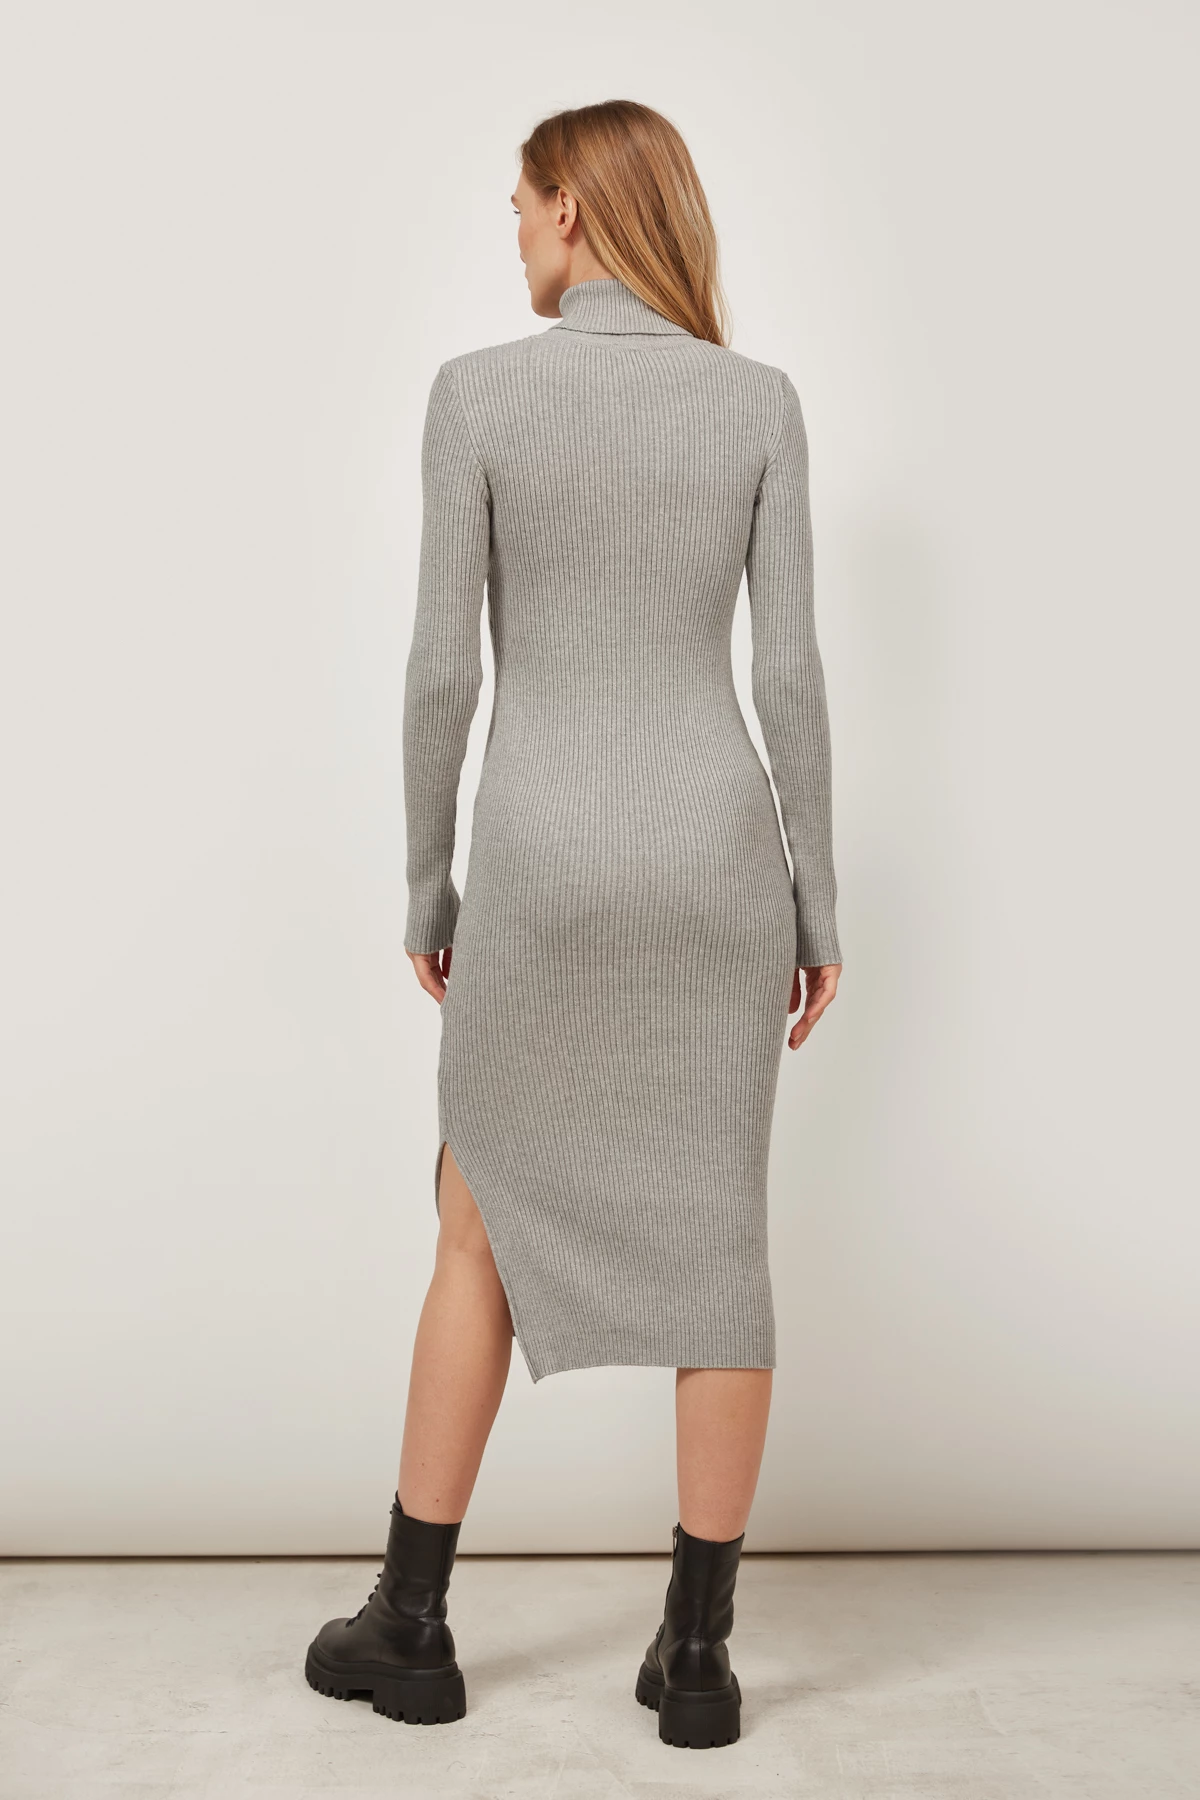 Knitted gray dress with neckline and viscose, photo 4